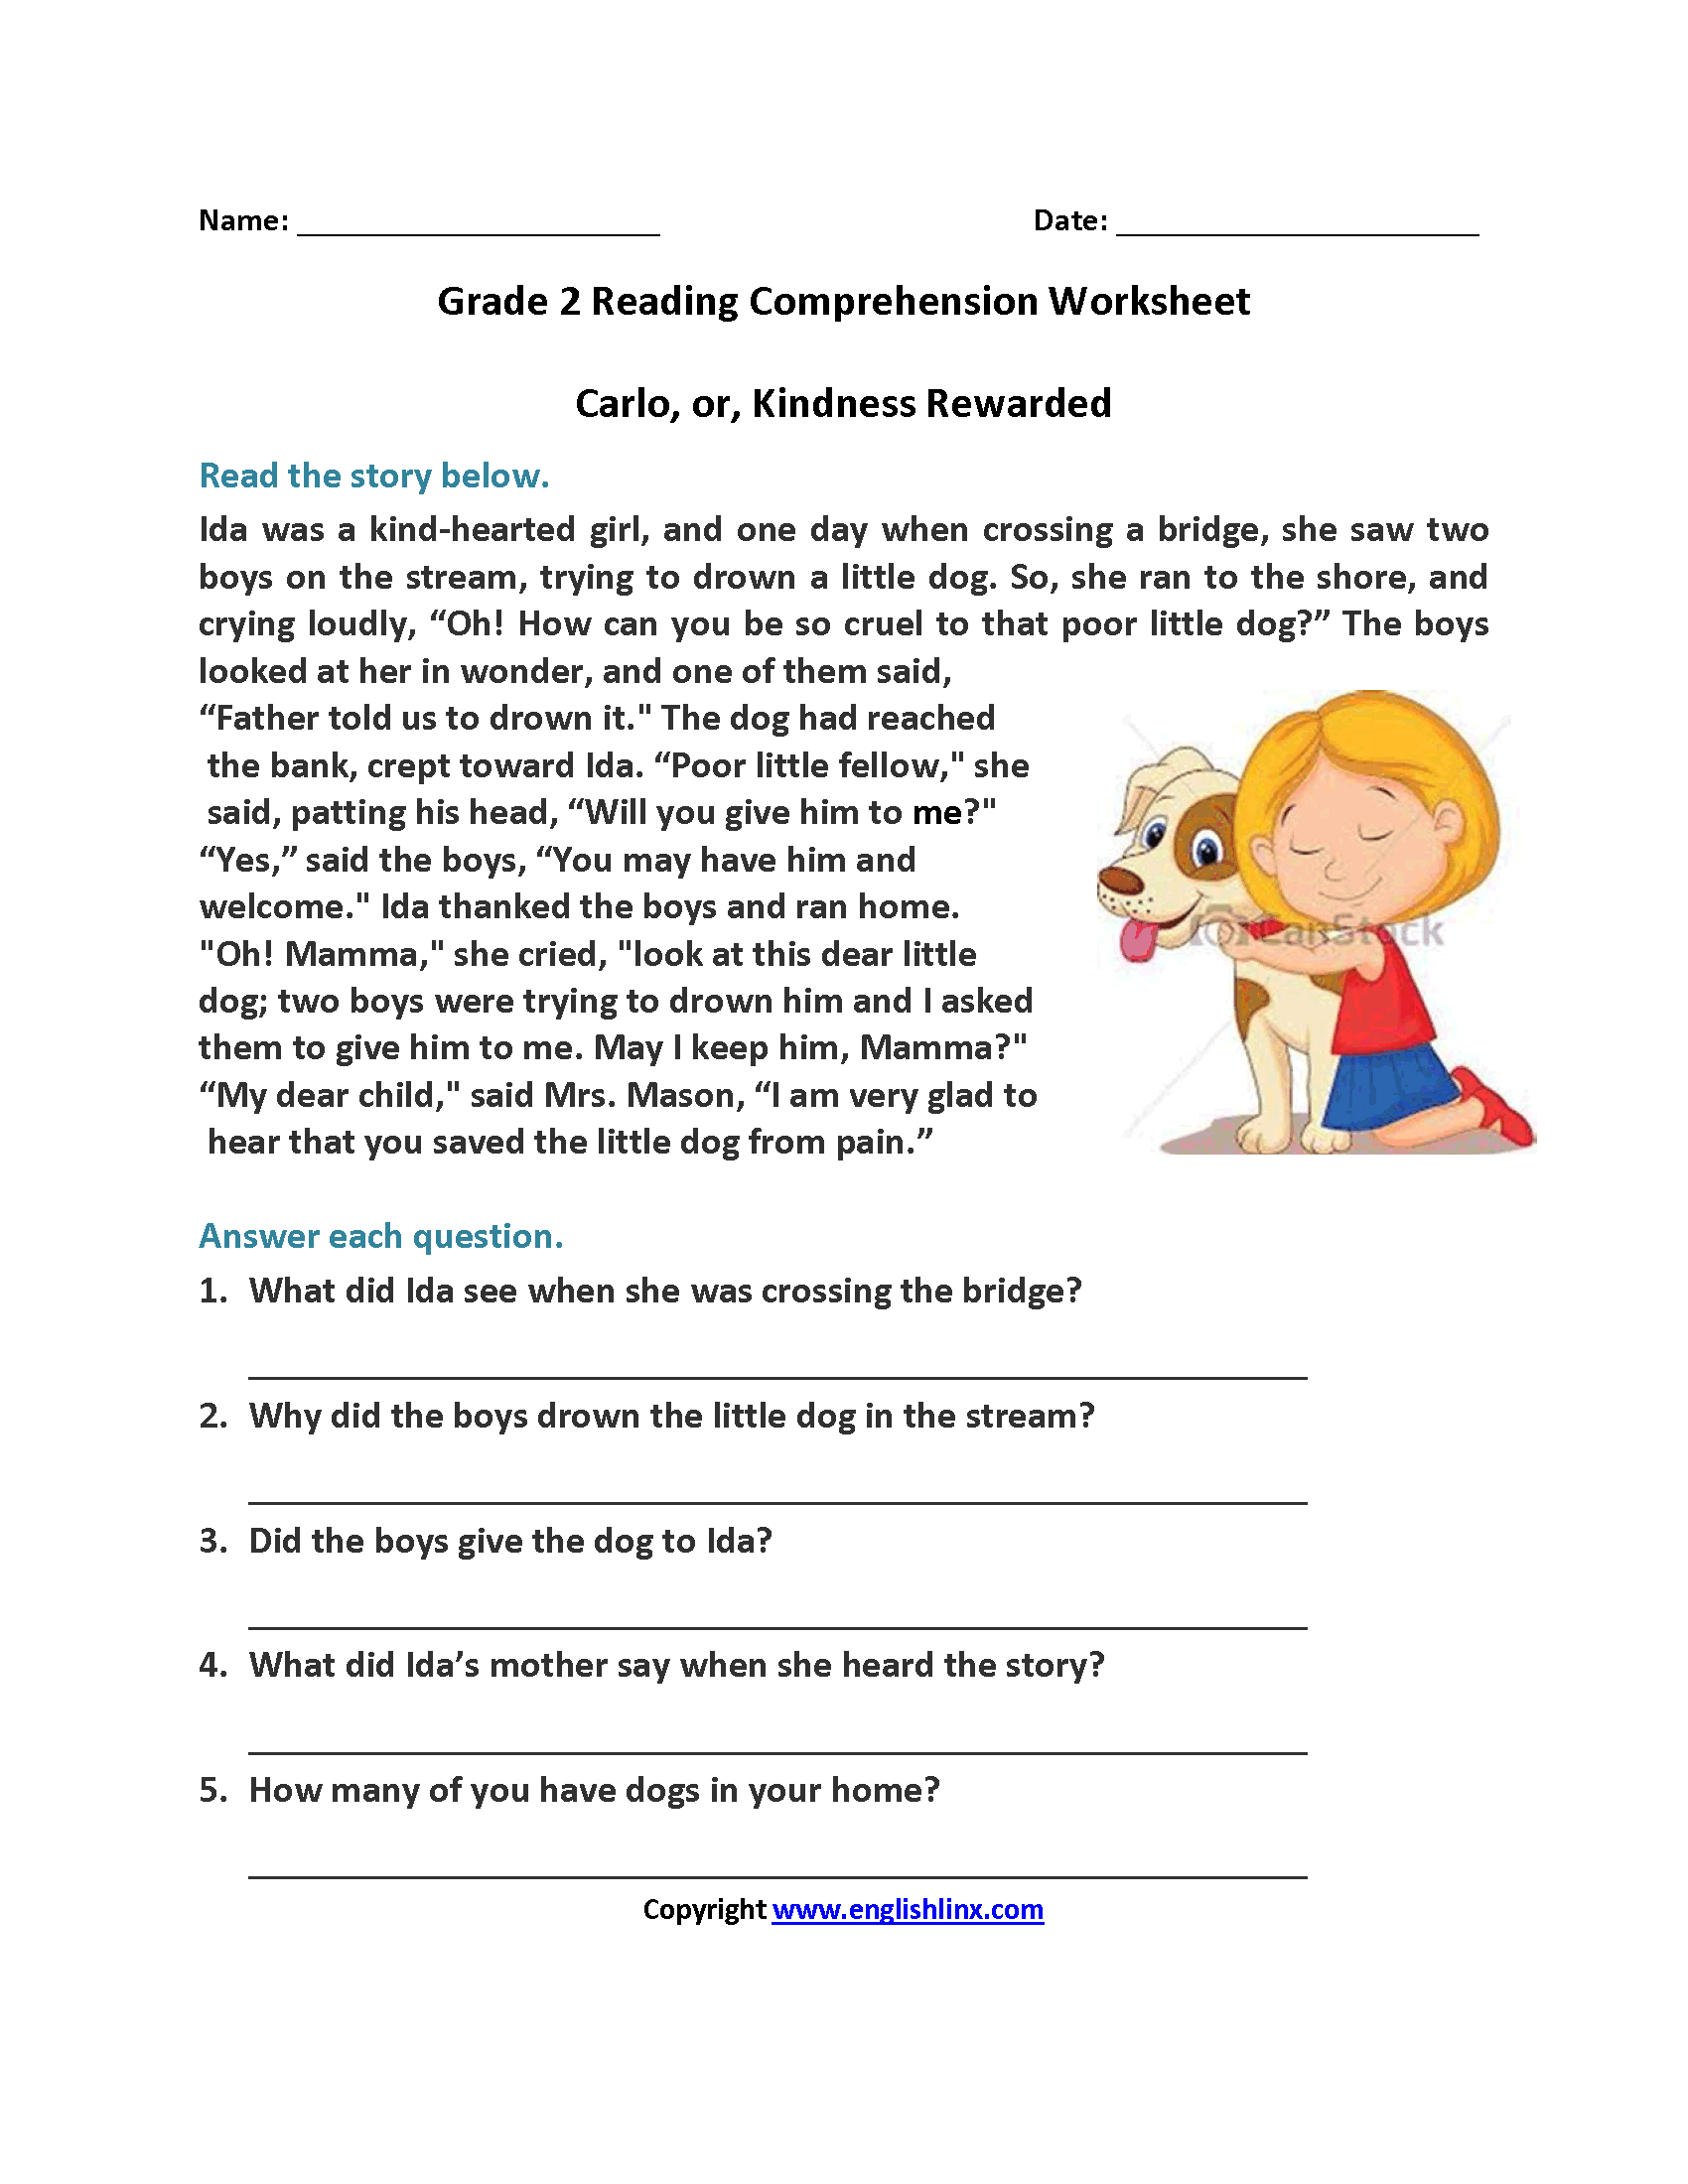 Carlo Or Kindness Rewarded Second Grade Reading Worksheets | Reading | Free Printable Worksheets Reading Comprehension 5Th Grade